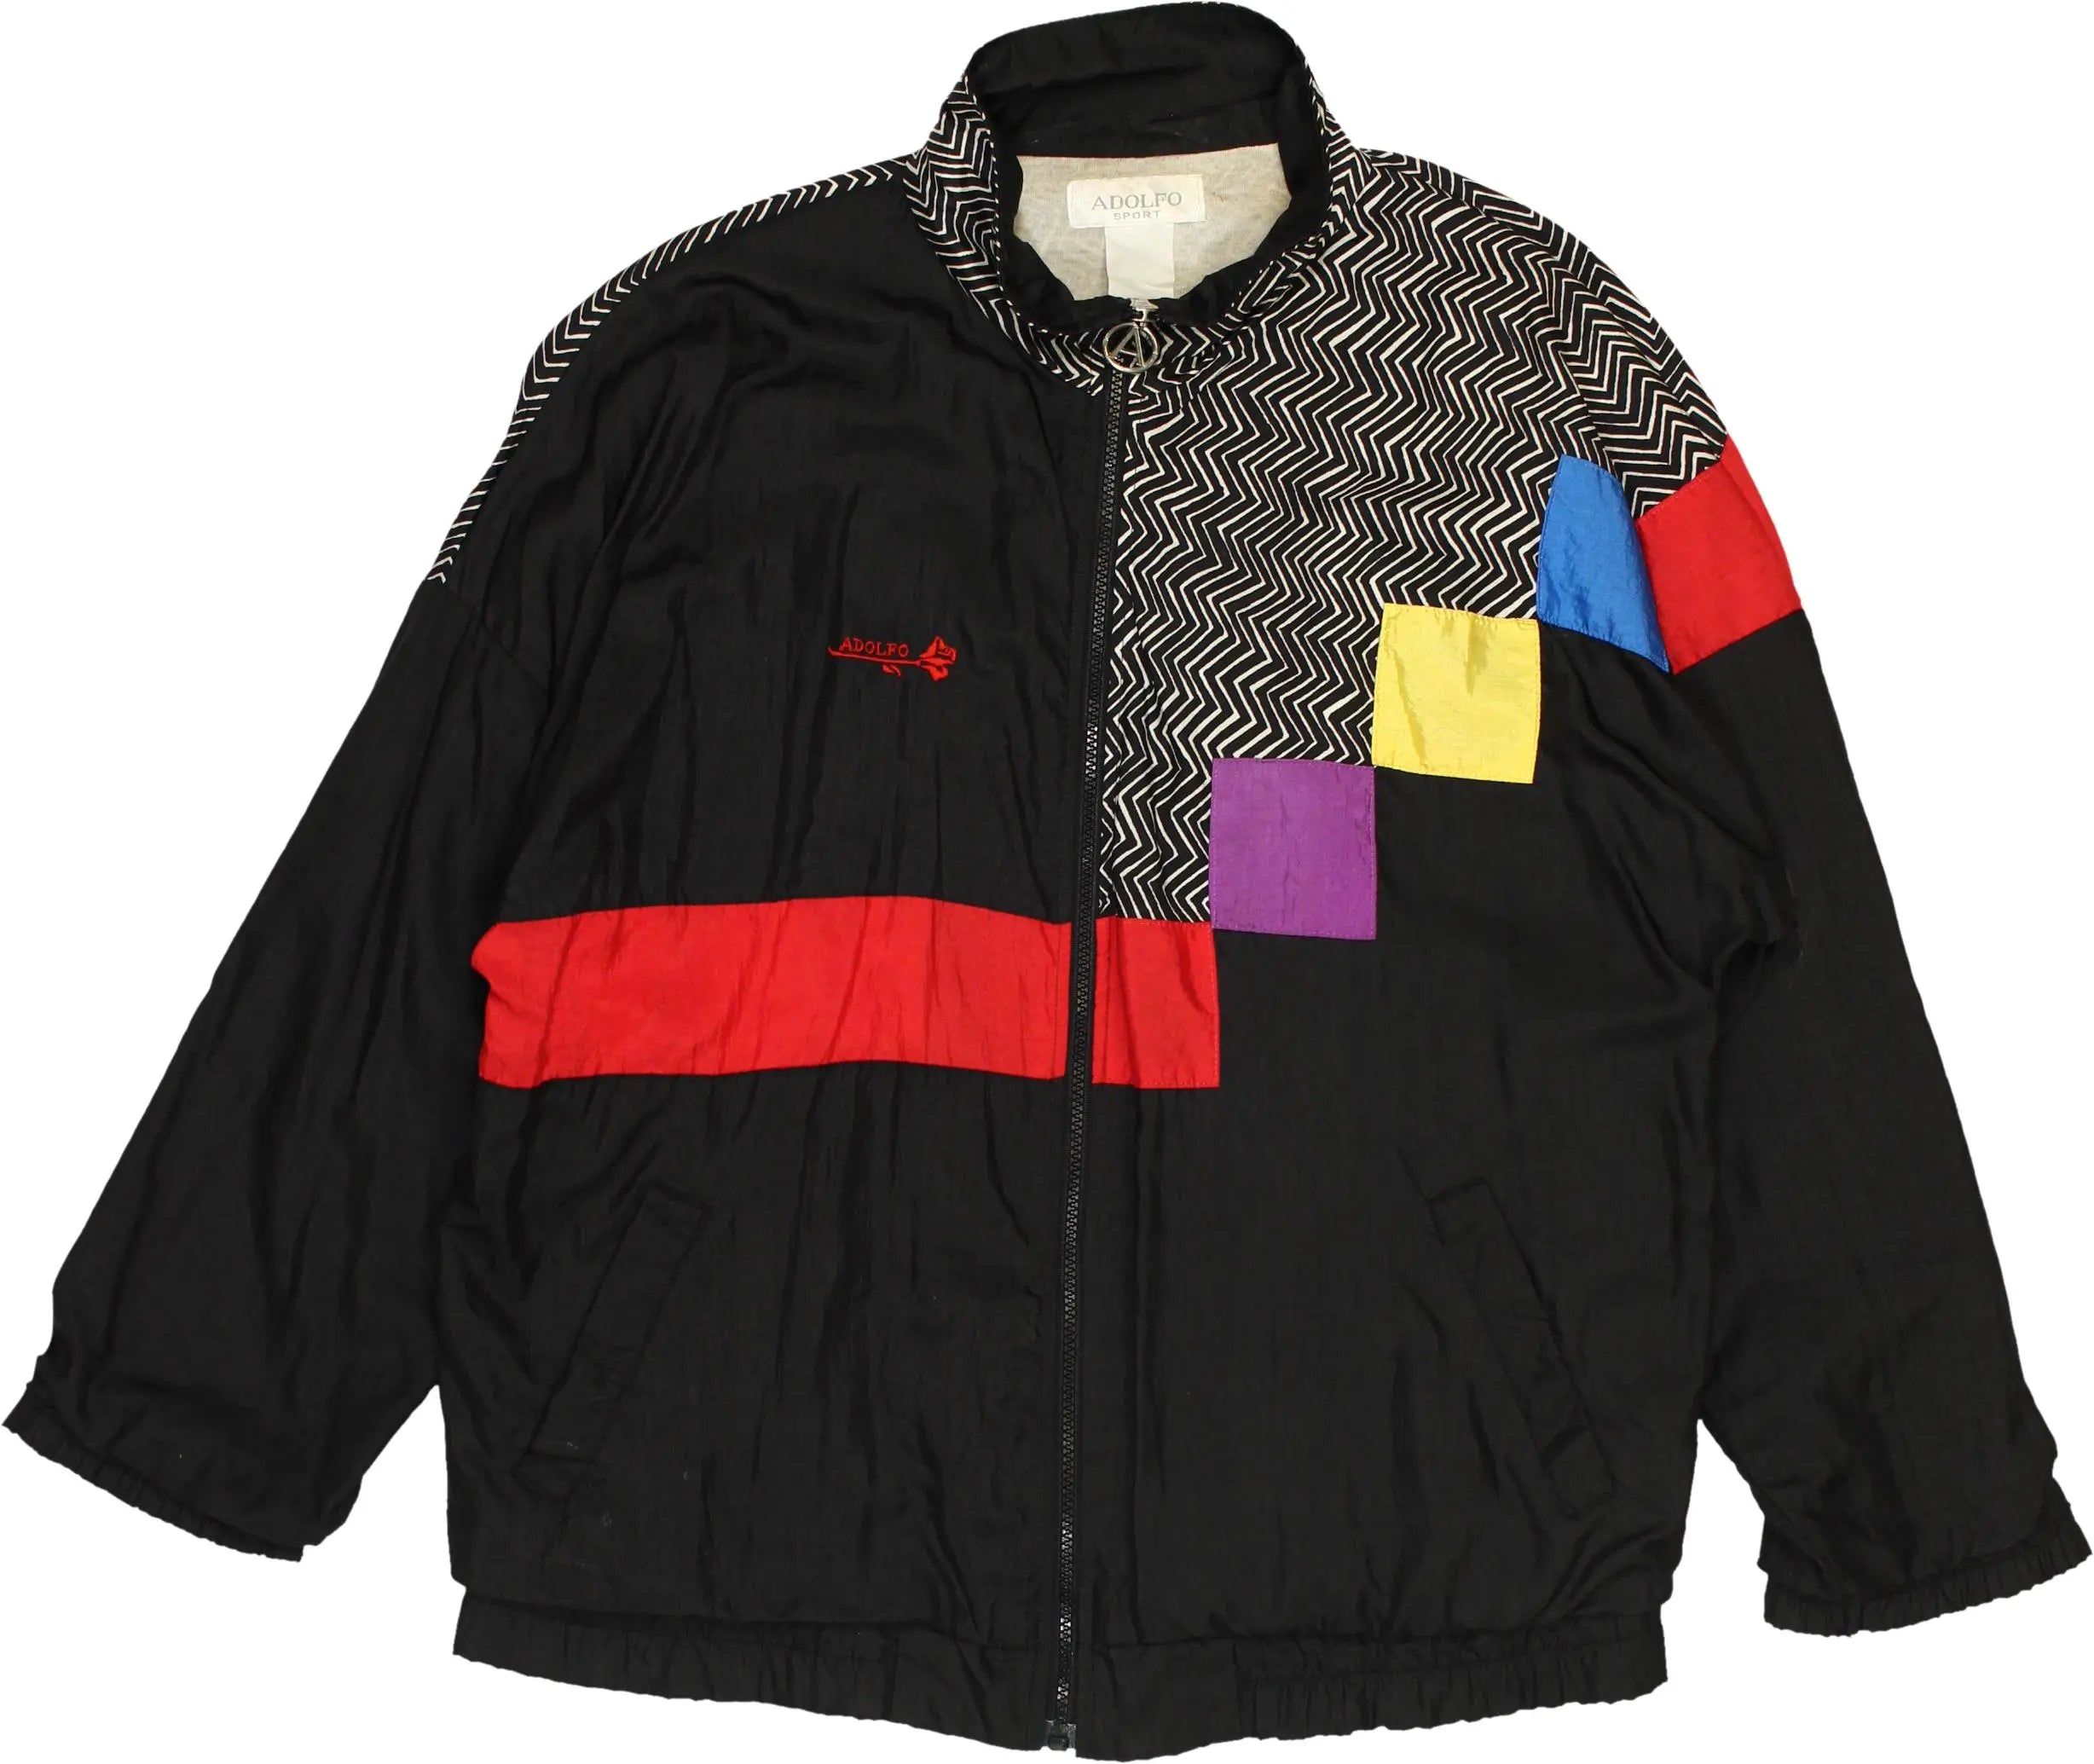 Adolfo Sport - 90s windjacket- ThriftTale.com - Vintage and second handclothing